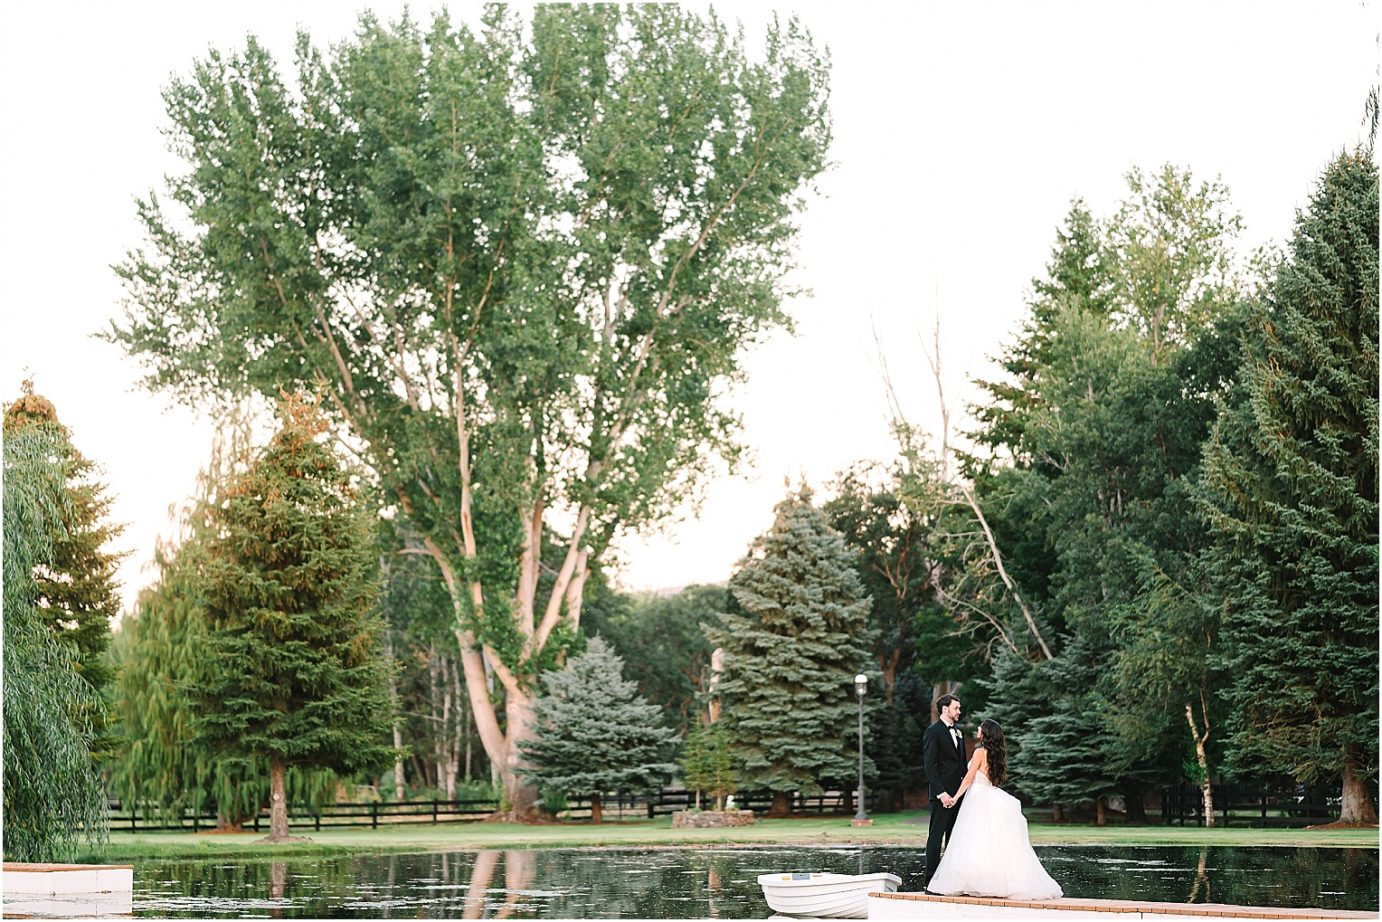 Disney-inspired Oakshire Estate Wedding sunset photos with couple by the pond